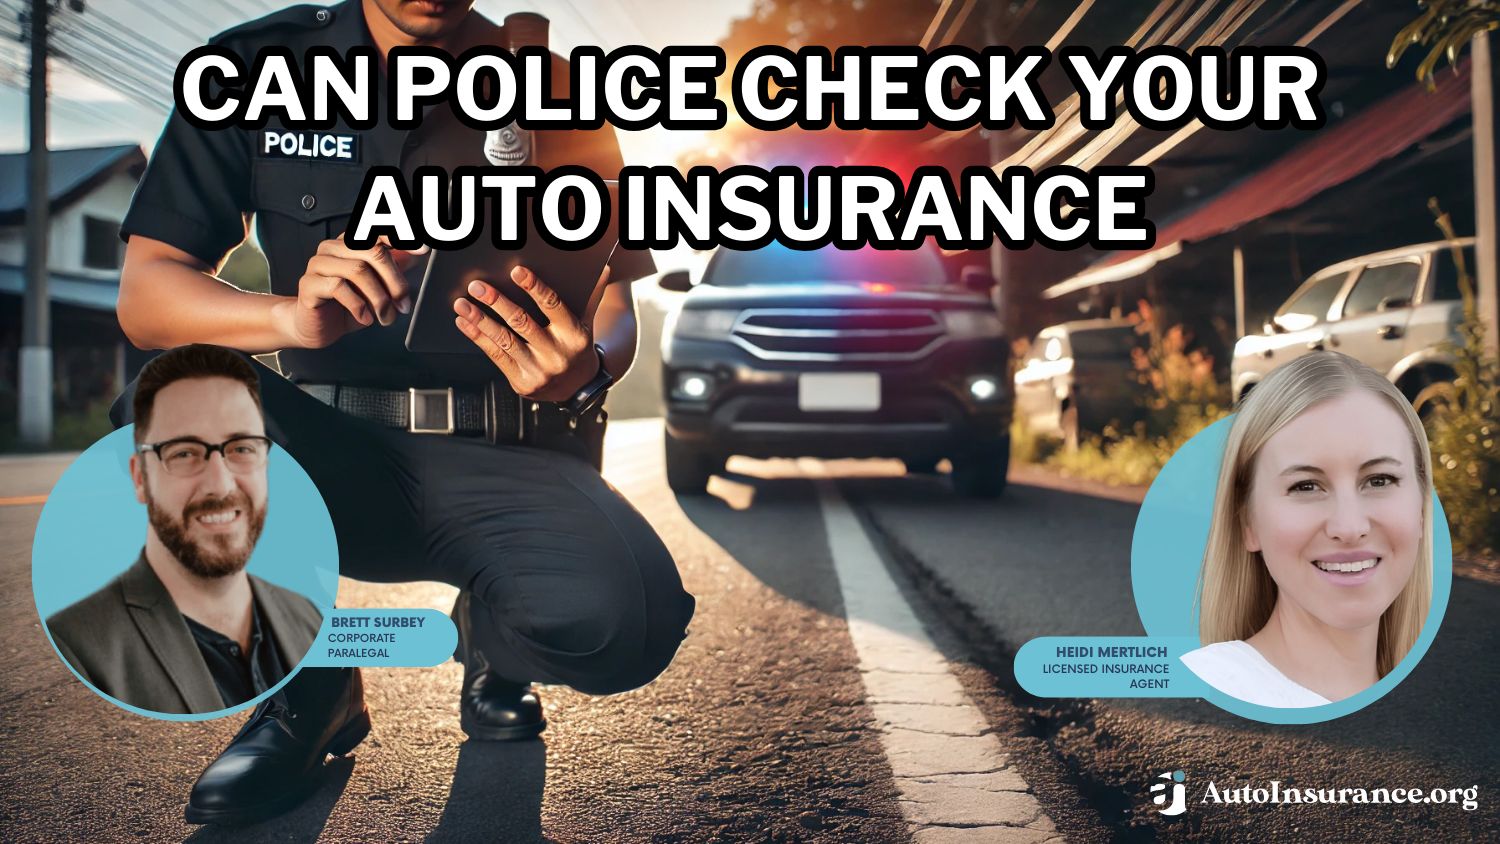 Can police check your auto insurance?